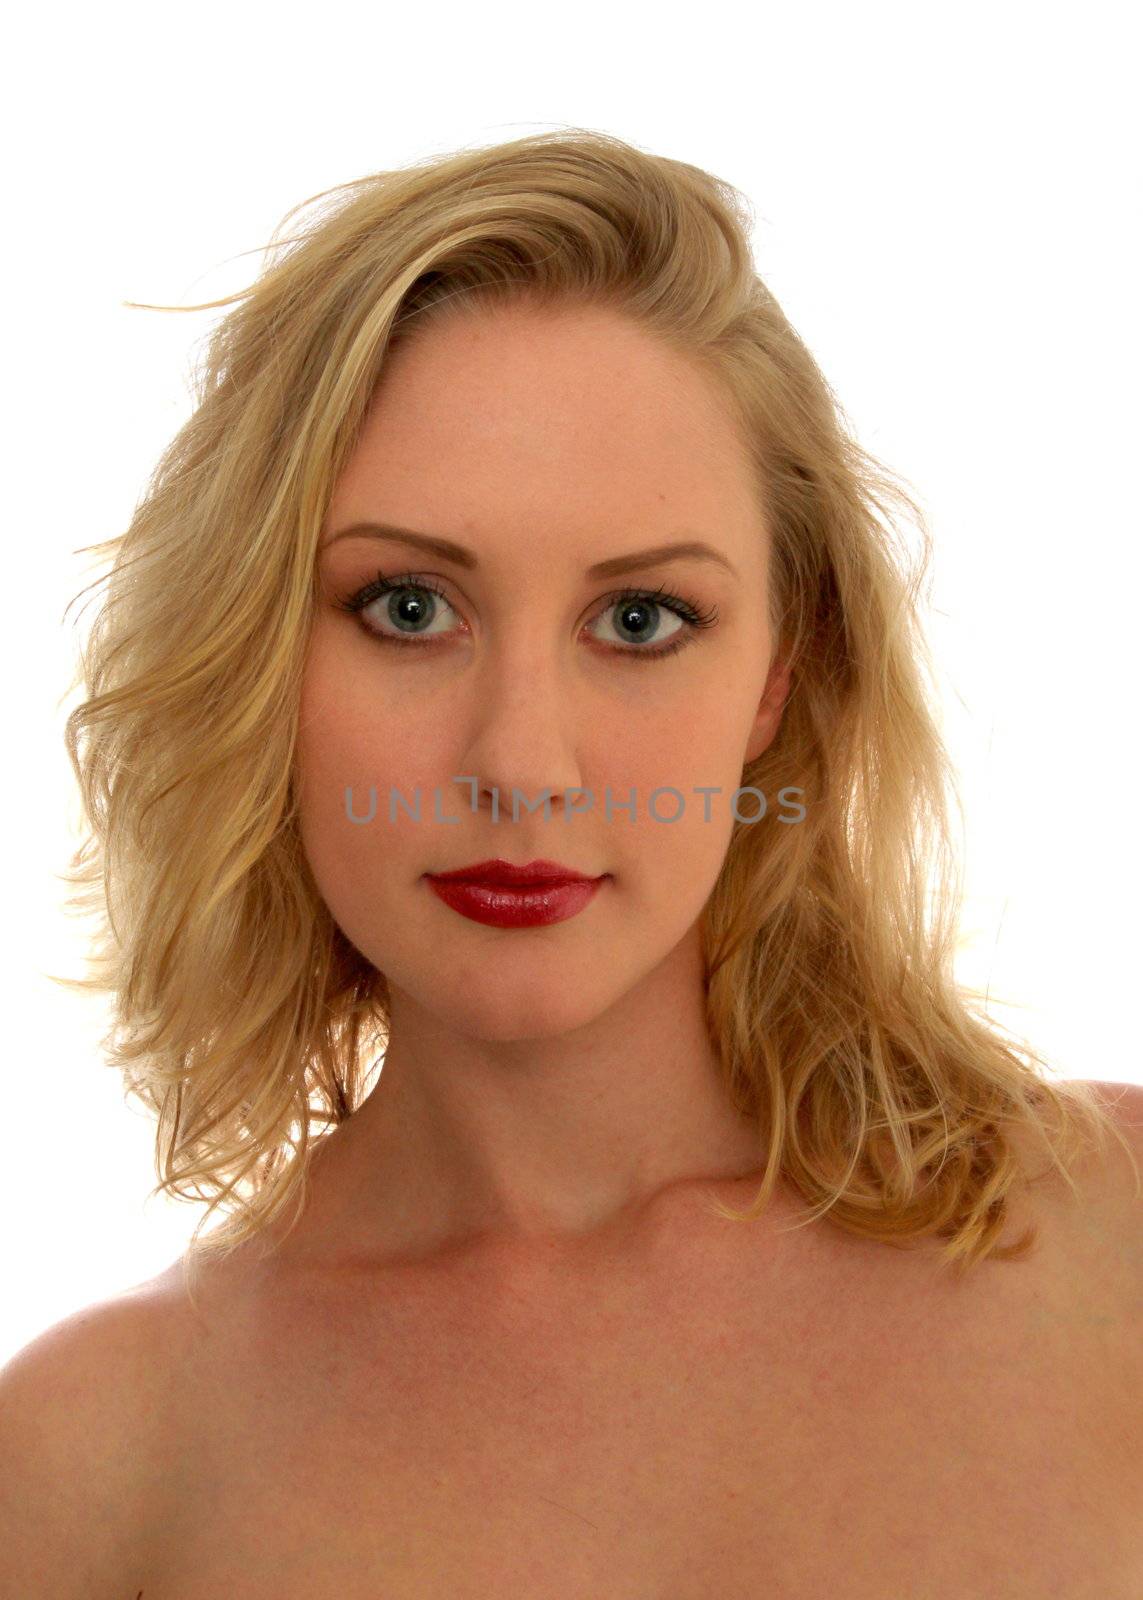 Portrait of a blond woman white background.